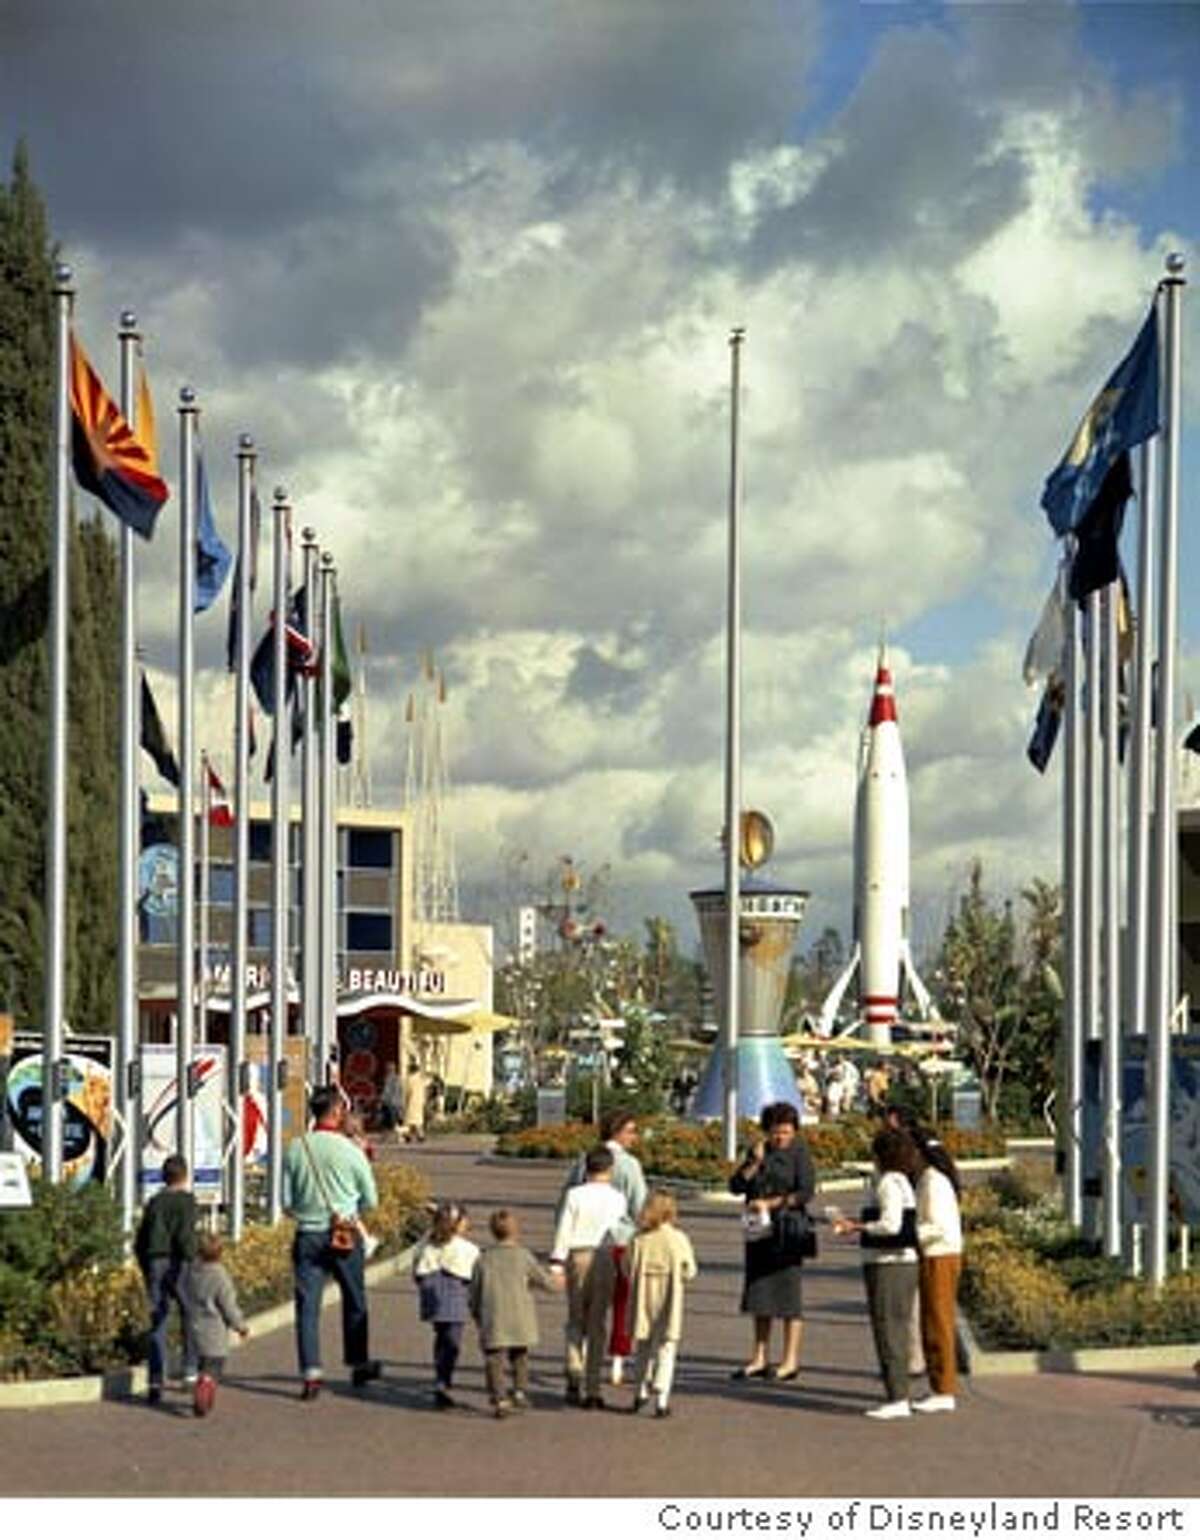 Yesterday�s Tomorrowland: When the park opened in 1955, this original "land" aspired to represent the futuristic year of 1986. Photo courtesy of Disneyland Resort